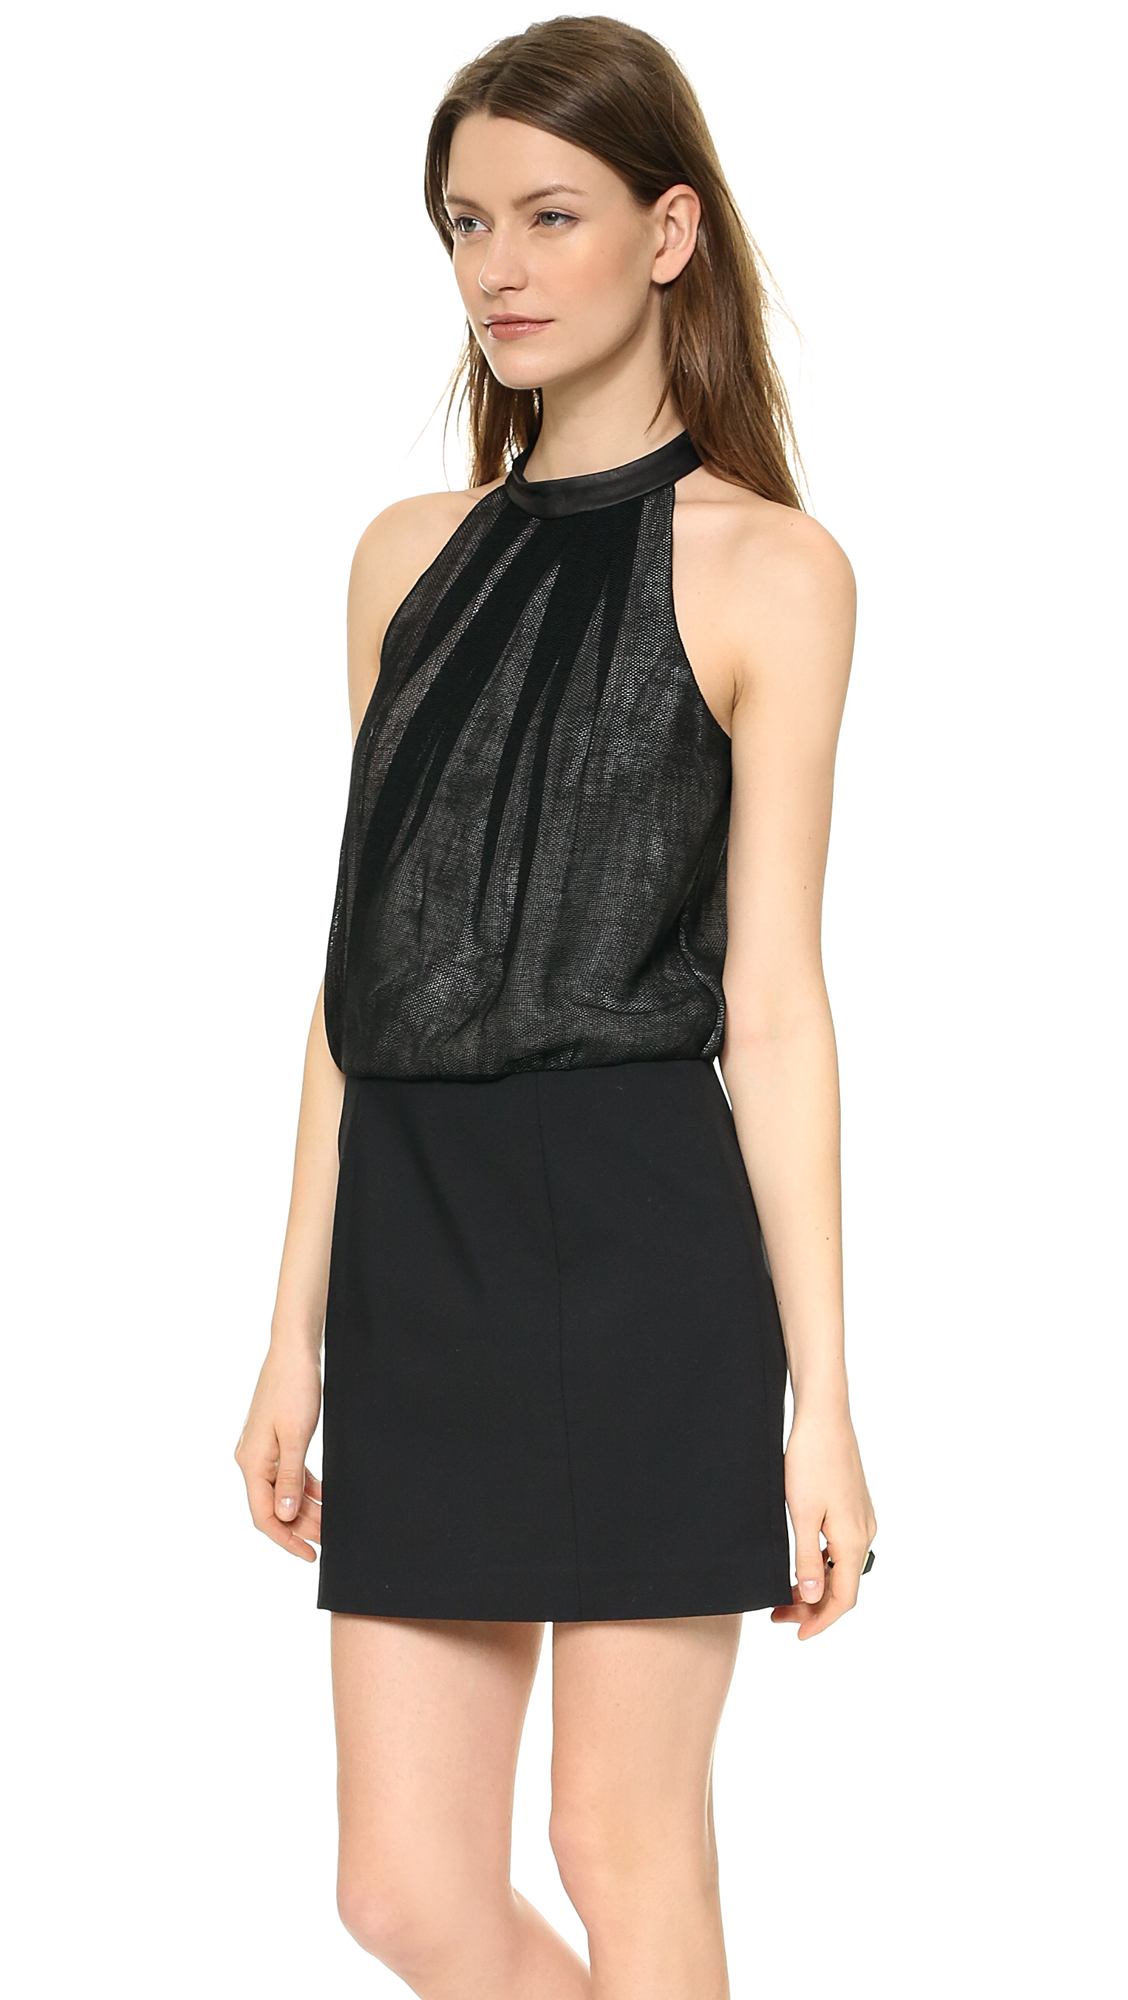 Lyst - Tibi Halter Dress with Leather Collar in Black